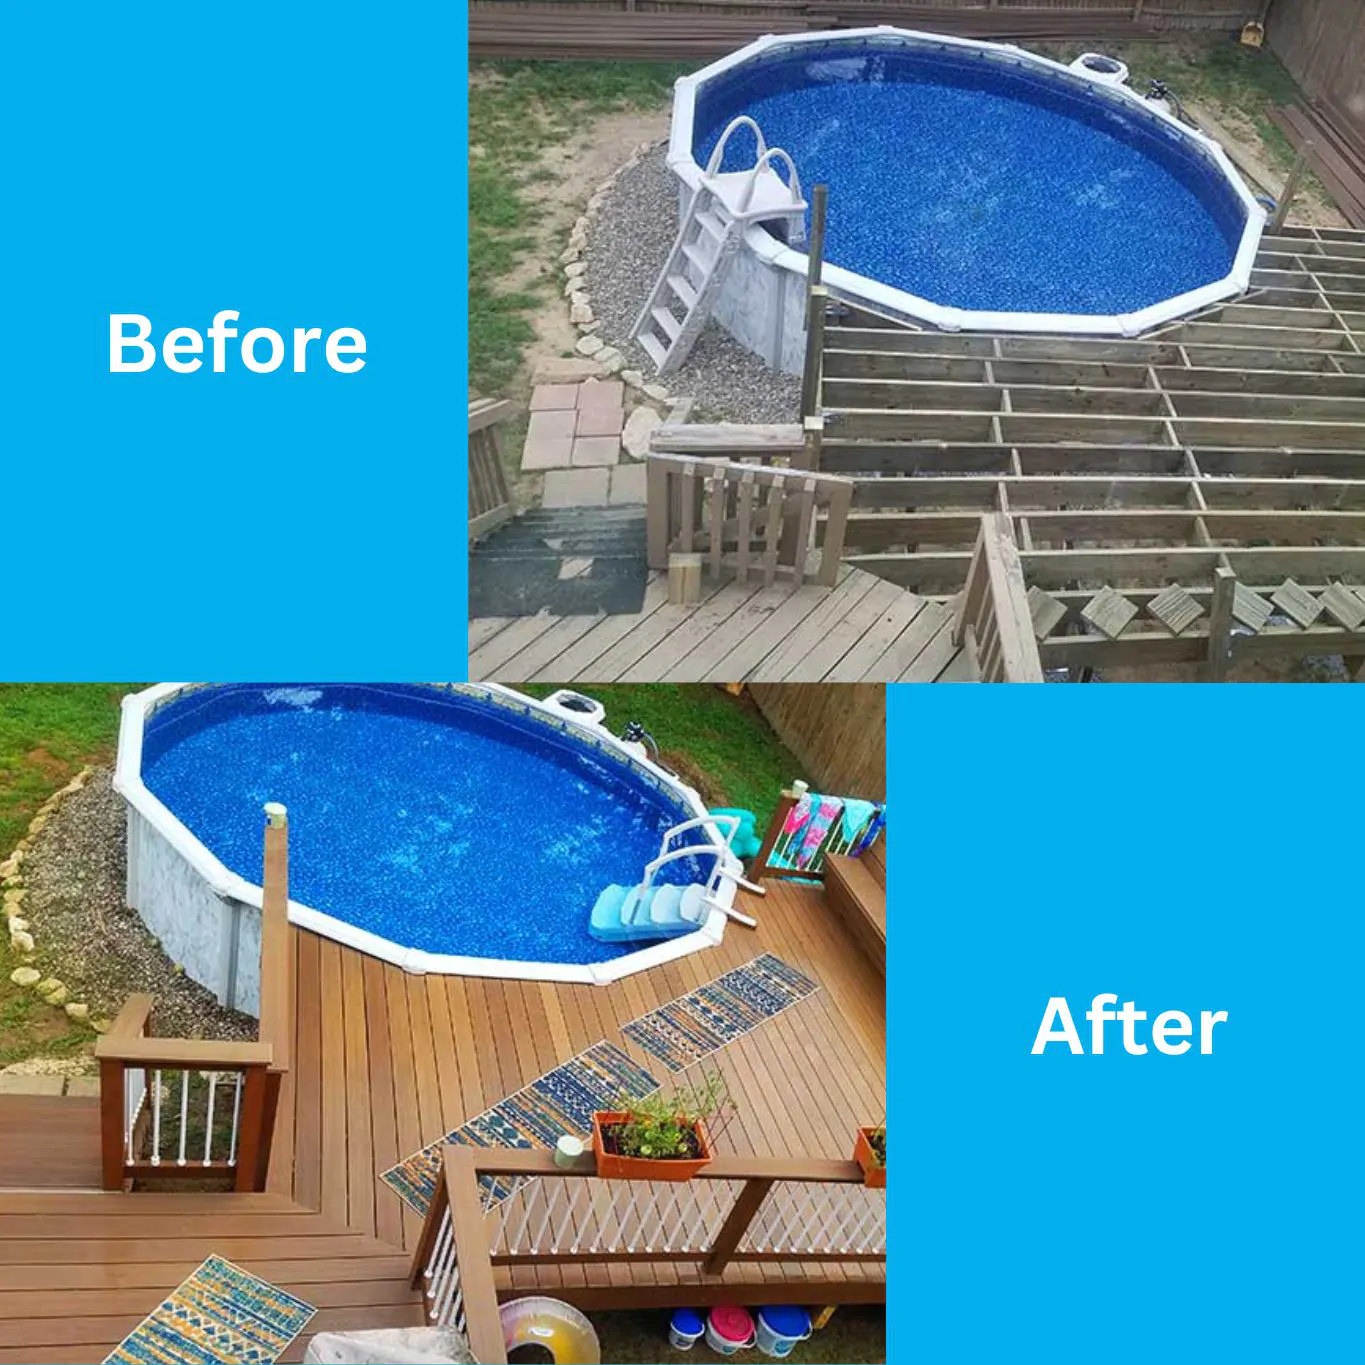 Before and After Pool Decks Installation Services - All Pro Cape May Deck Builders